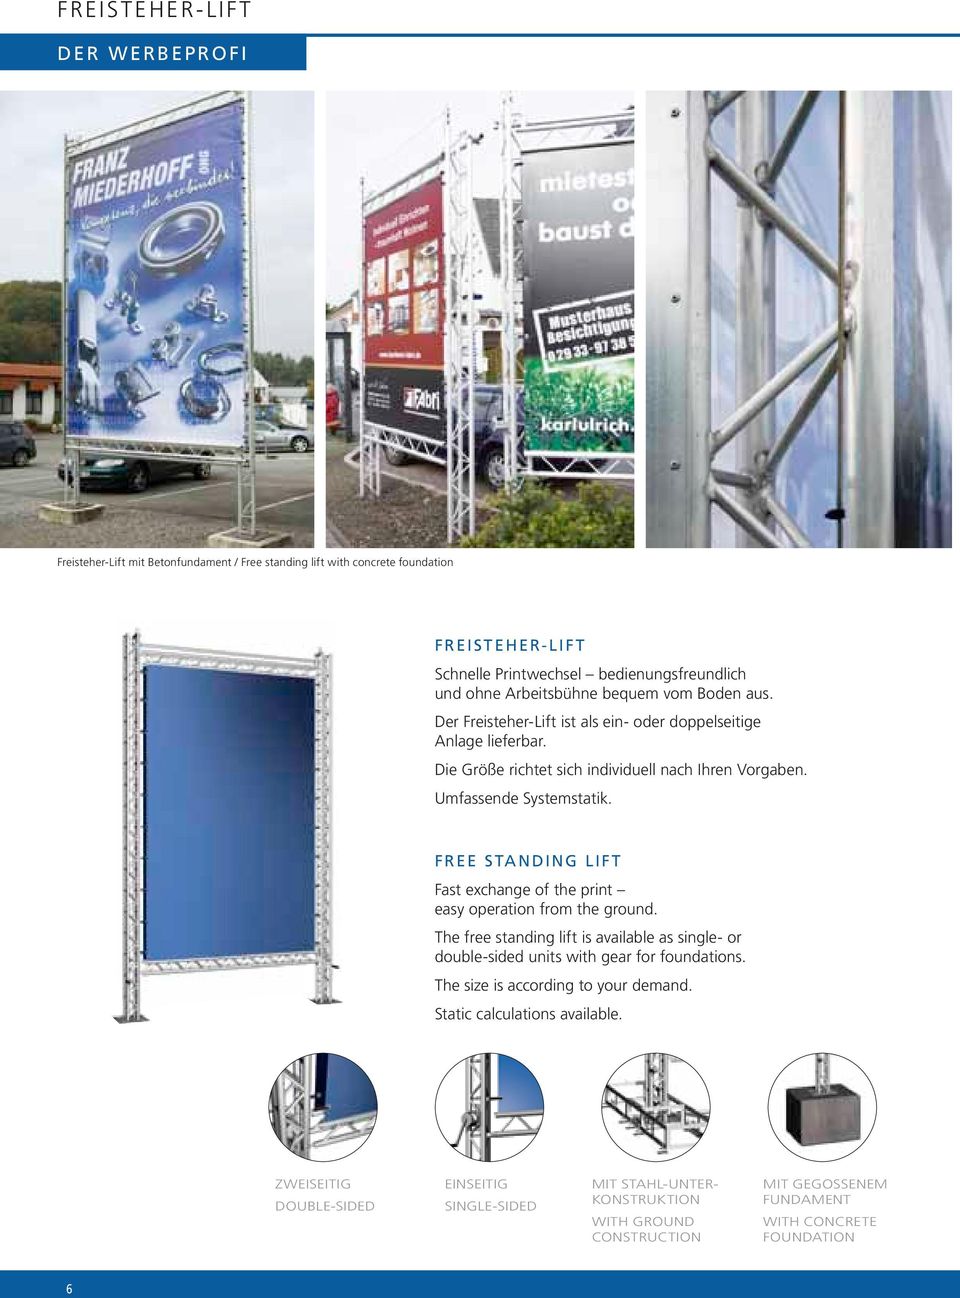 F r e e S ta n d i n g L i f t Fast exchange of the print easy operation from the ground. The free standing lift is available as single or doublesided units with gear for foundations.